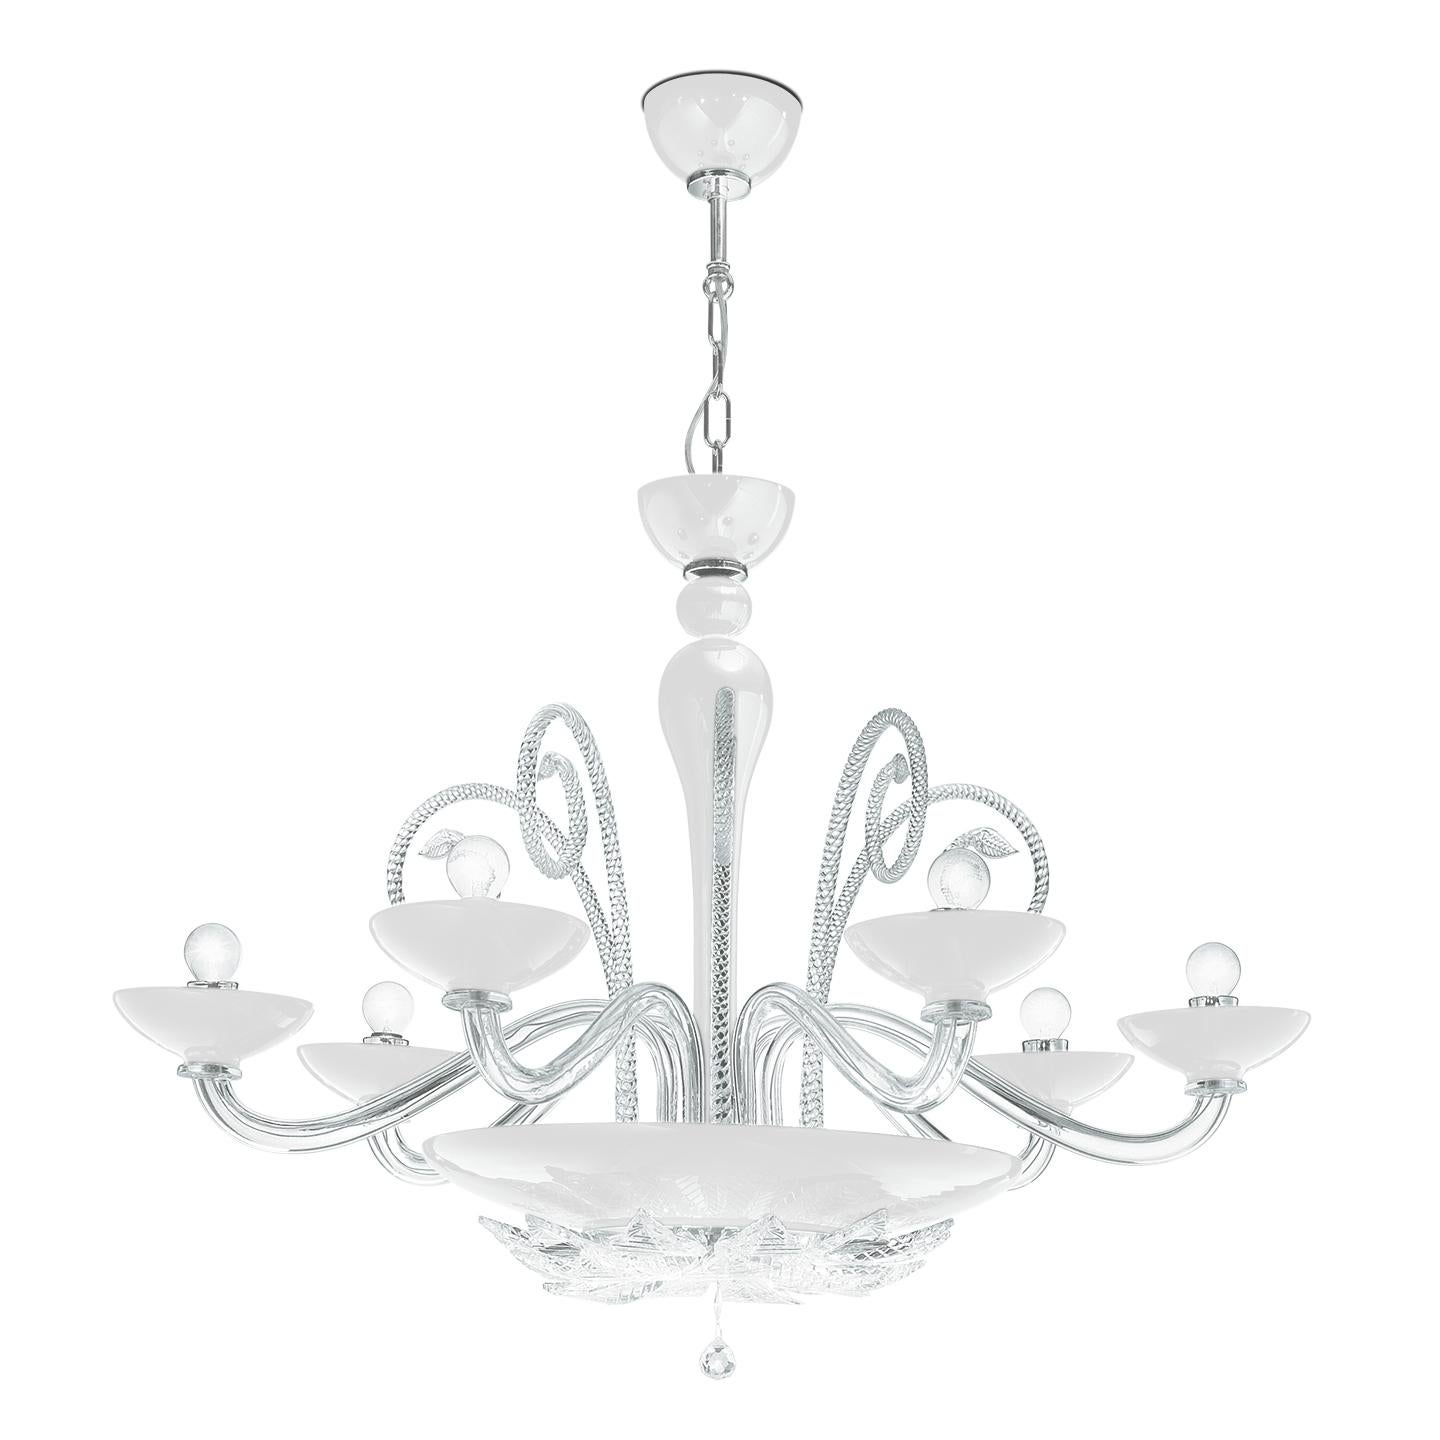 Leucos Orleans L 12 Chandelier in White & Crystal & Chrome by MariToscano For Sale